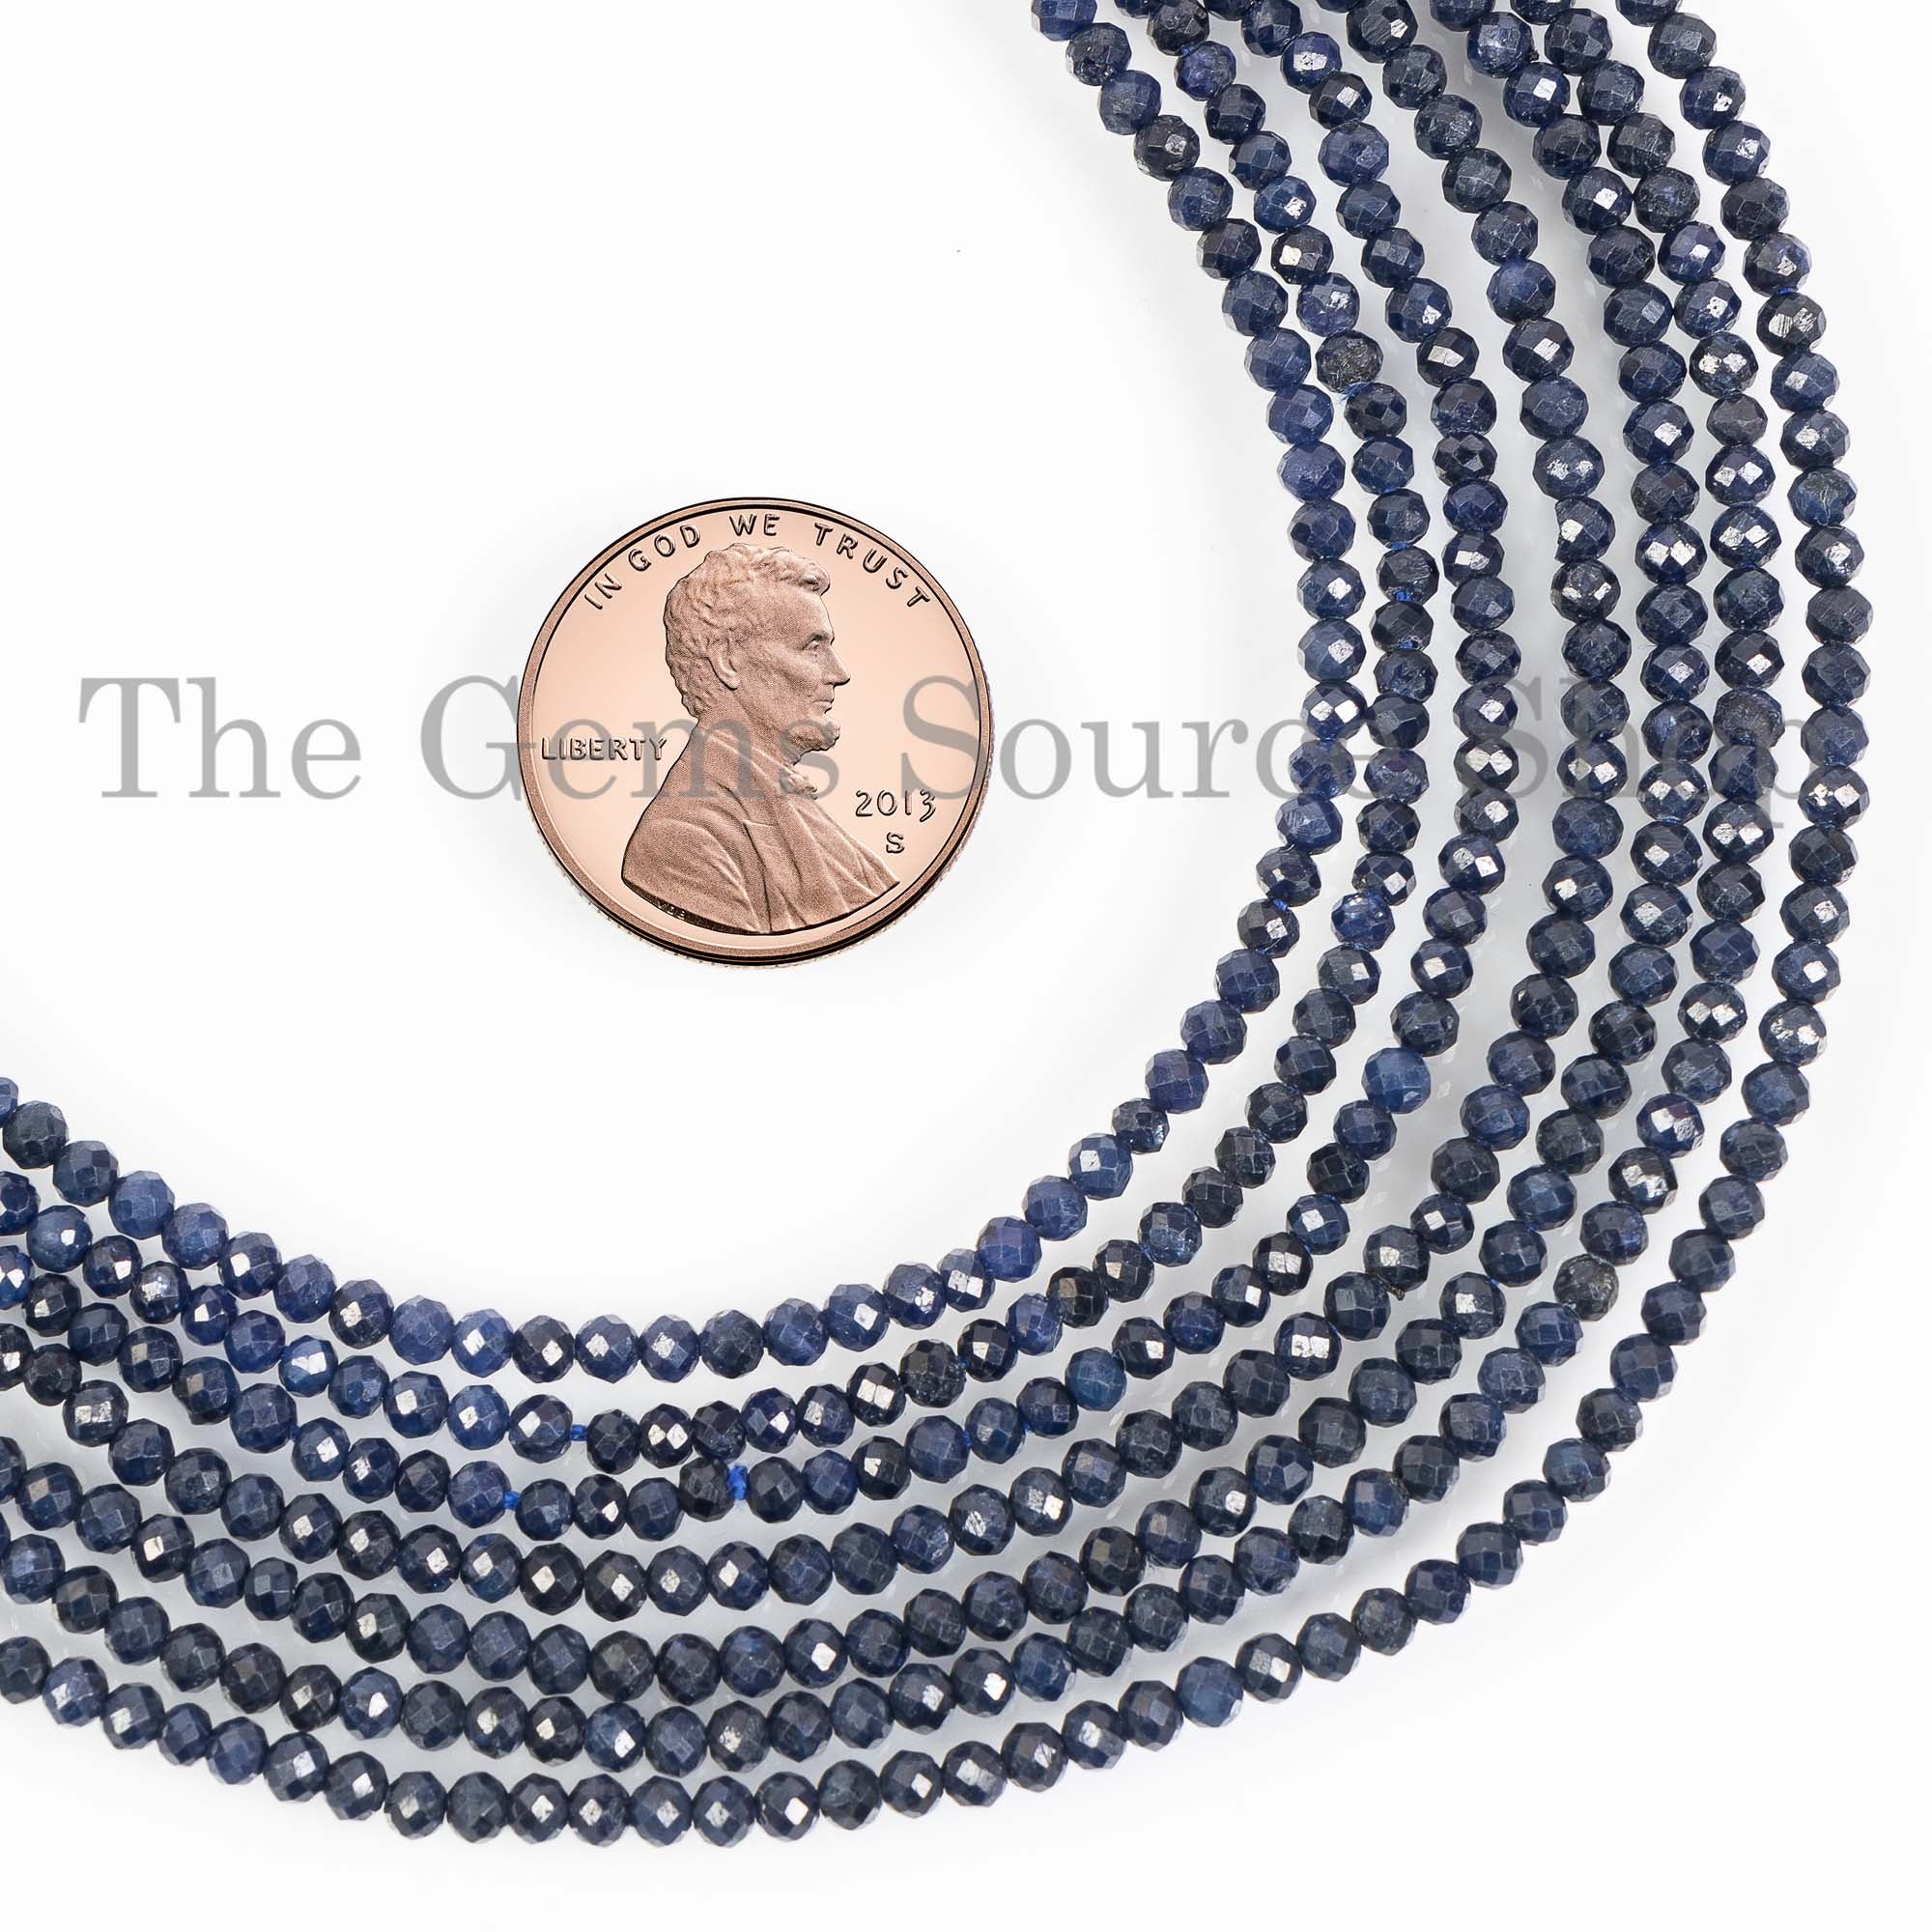 Blue Sapphire 2.5-3mm Rondelle Beads, Sapphire Faceted Beads, Sapphire Beads, Blue Sapphire Gemstone, Jewelry Making Beads, Wholesale